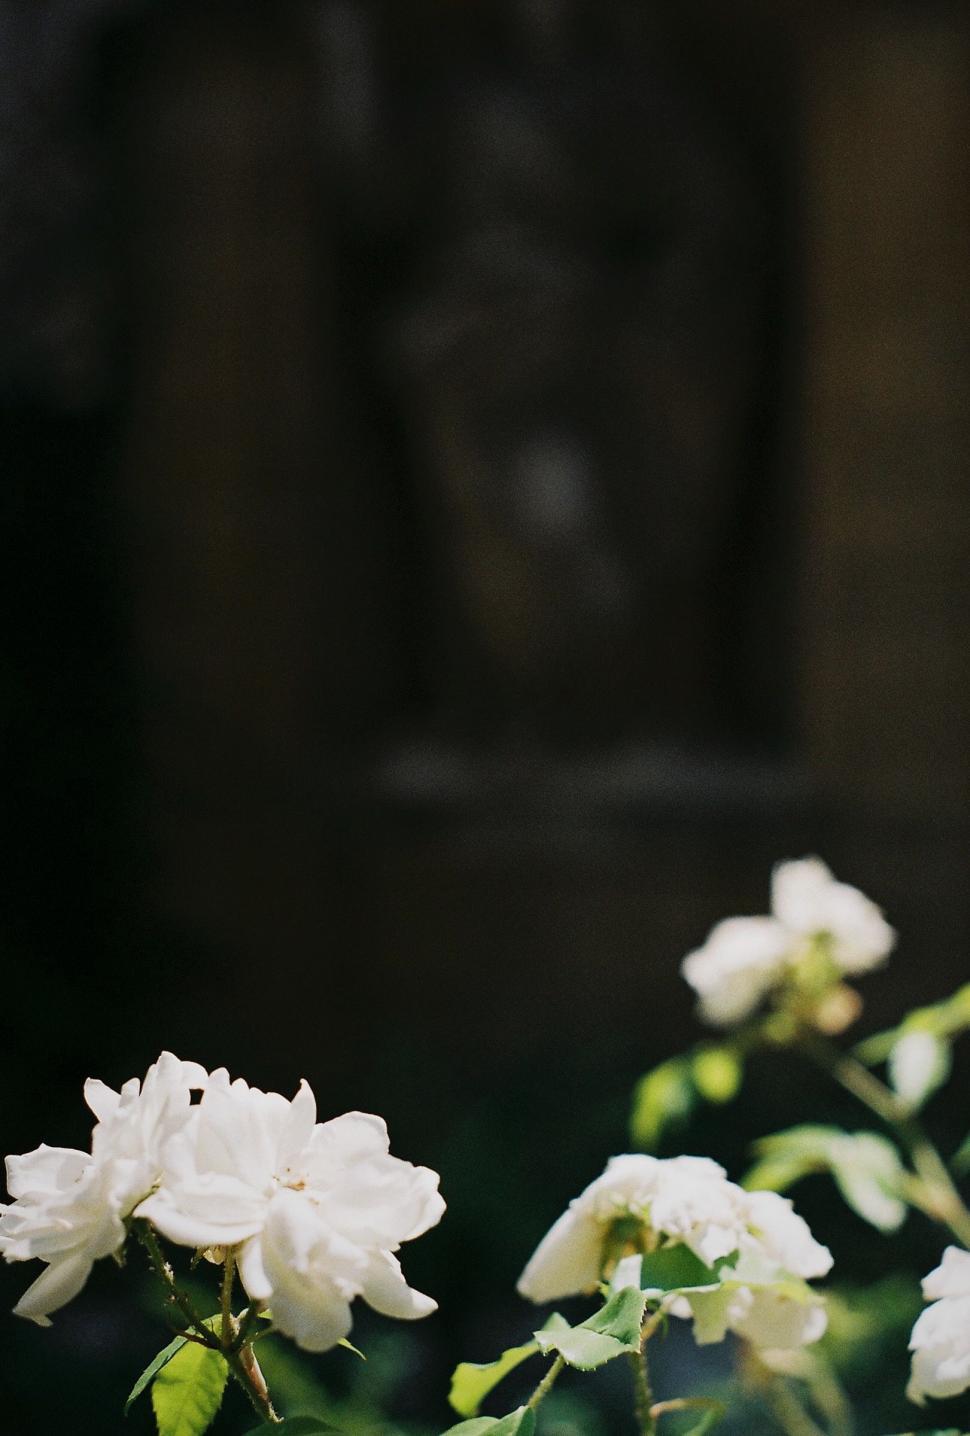 Free Image of White Flowers In Front of Statue 